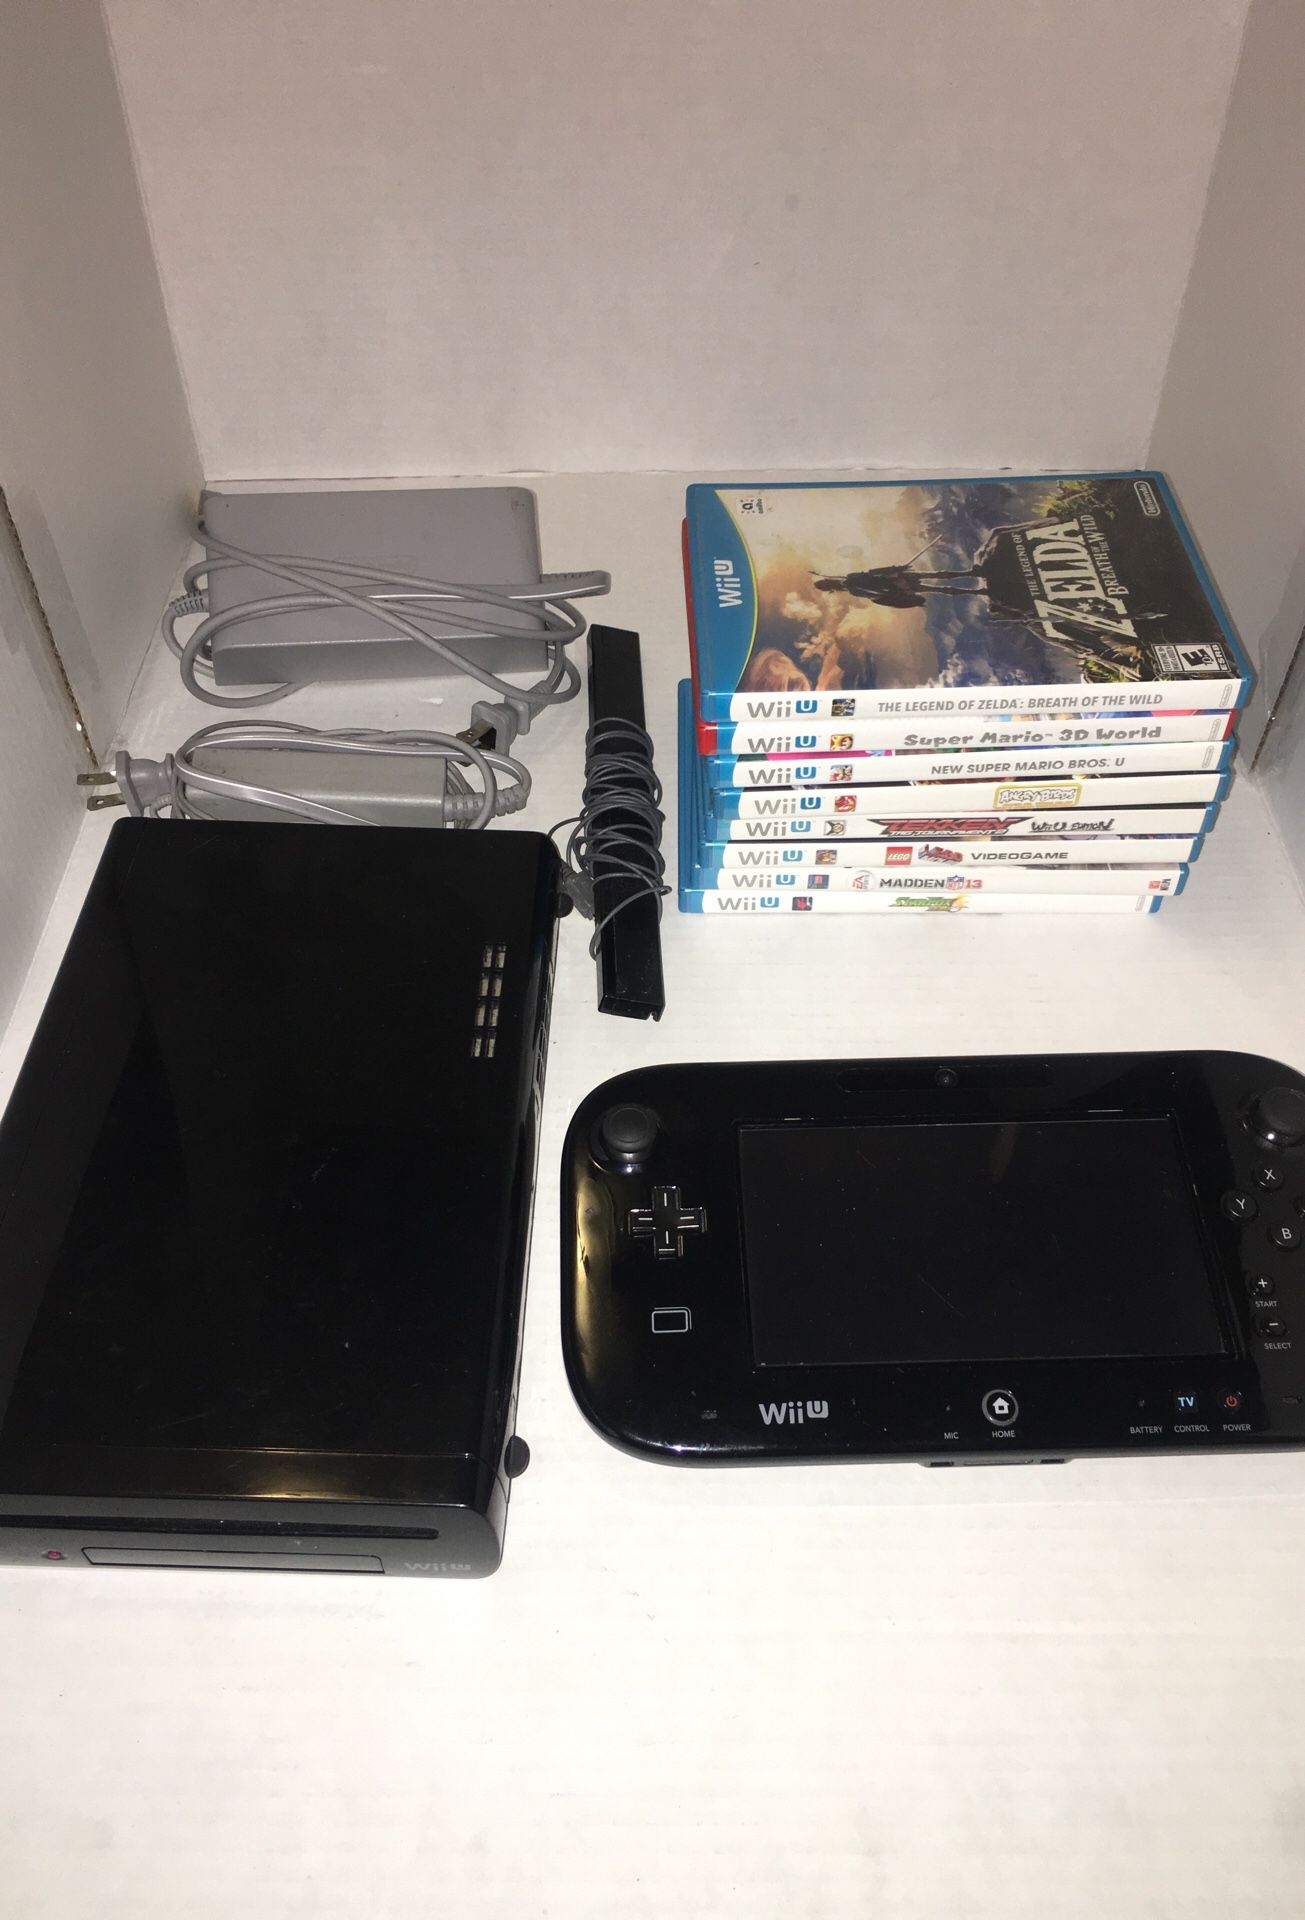 Nintendo WII U preloaded with Mario kart 8 and 8 games works great